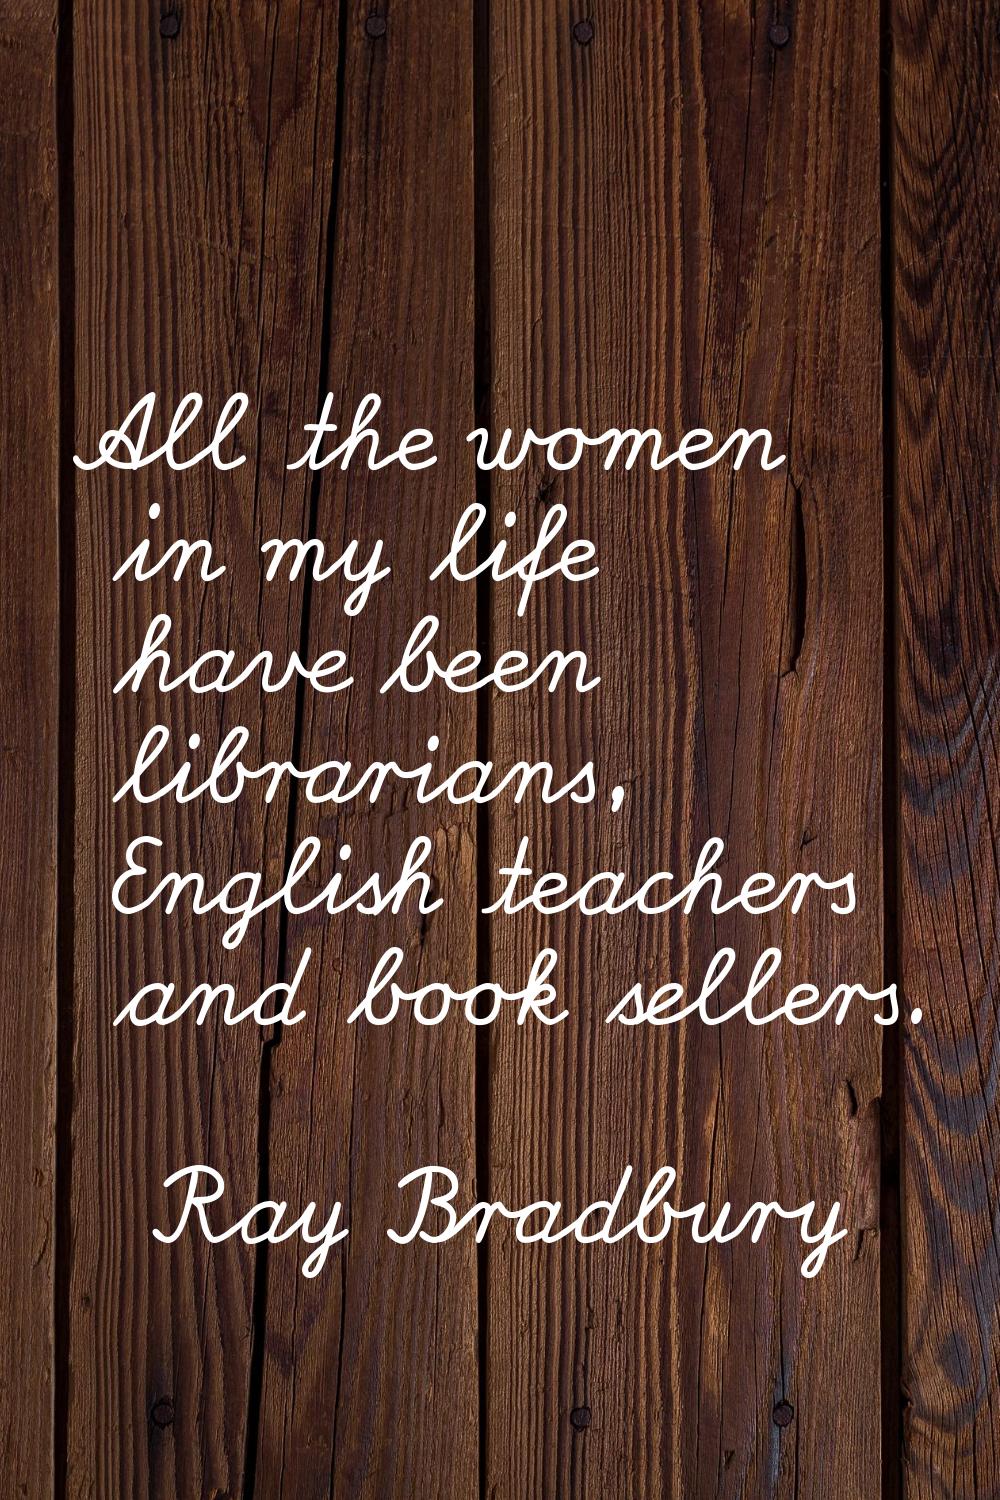 All the women in my life have been librarians, English teachers and book sellers.